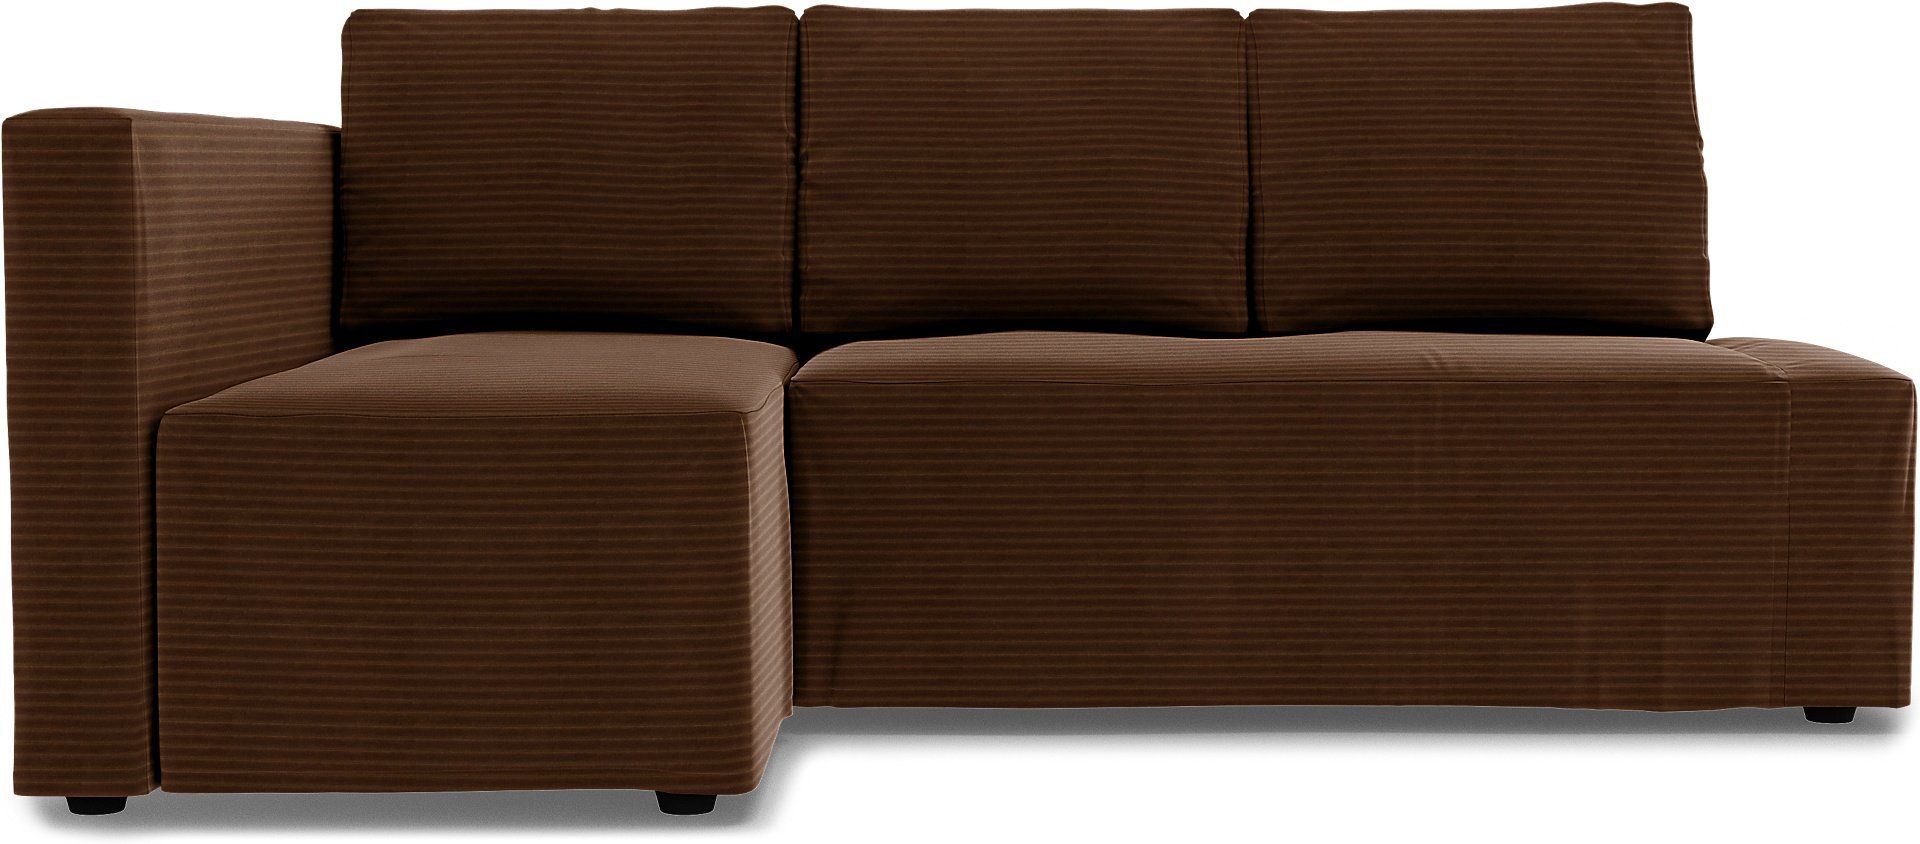 IKEA - Friheten Sofa Bed with Left Chaise Cover, Chocolate Brown, Corduroy - Bemz